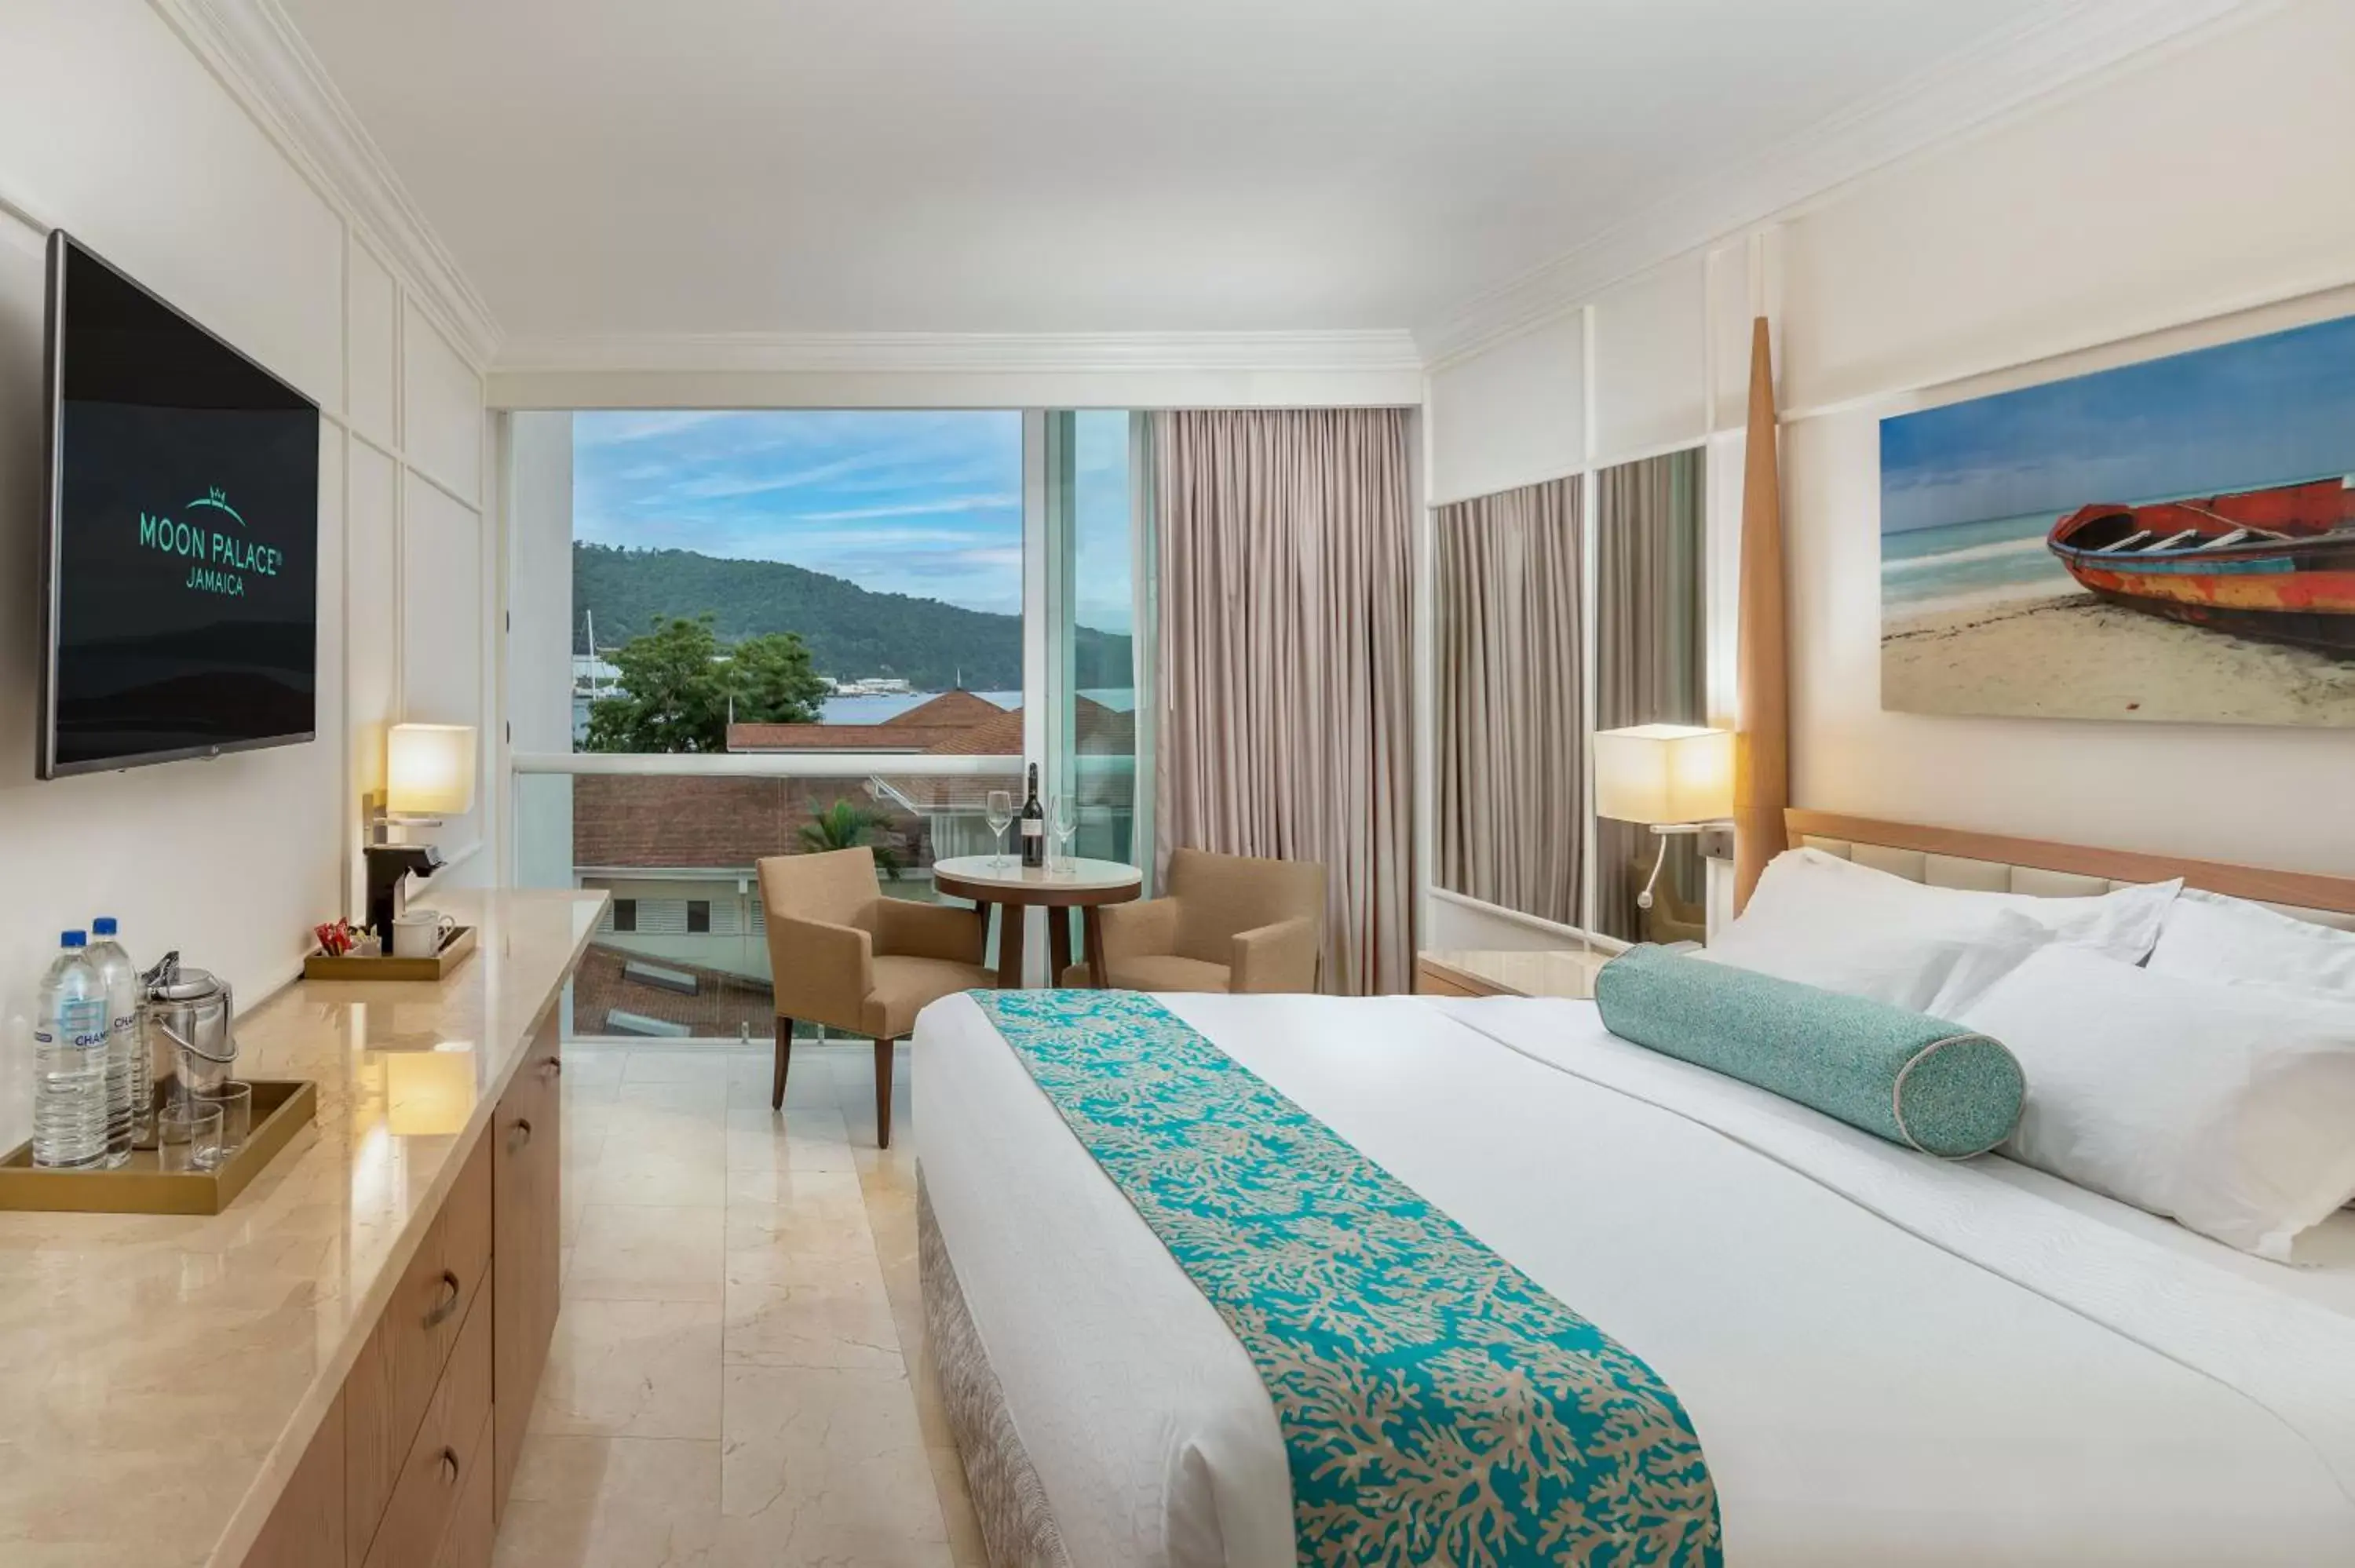 Deluxe Room with Resort View in Moon Palace Jamaica